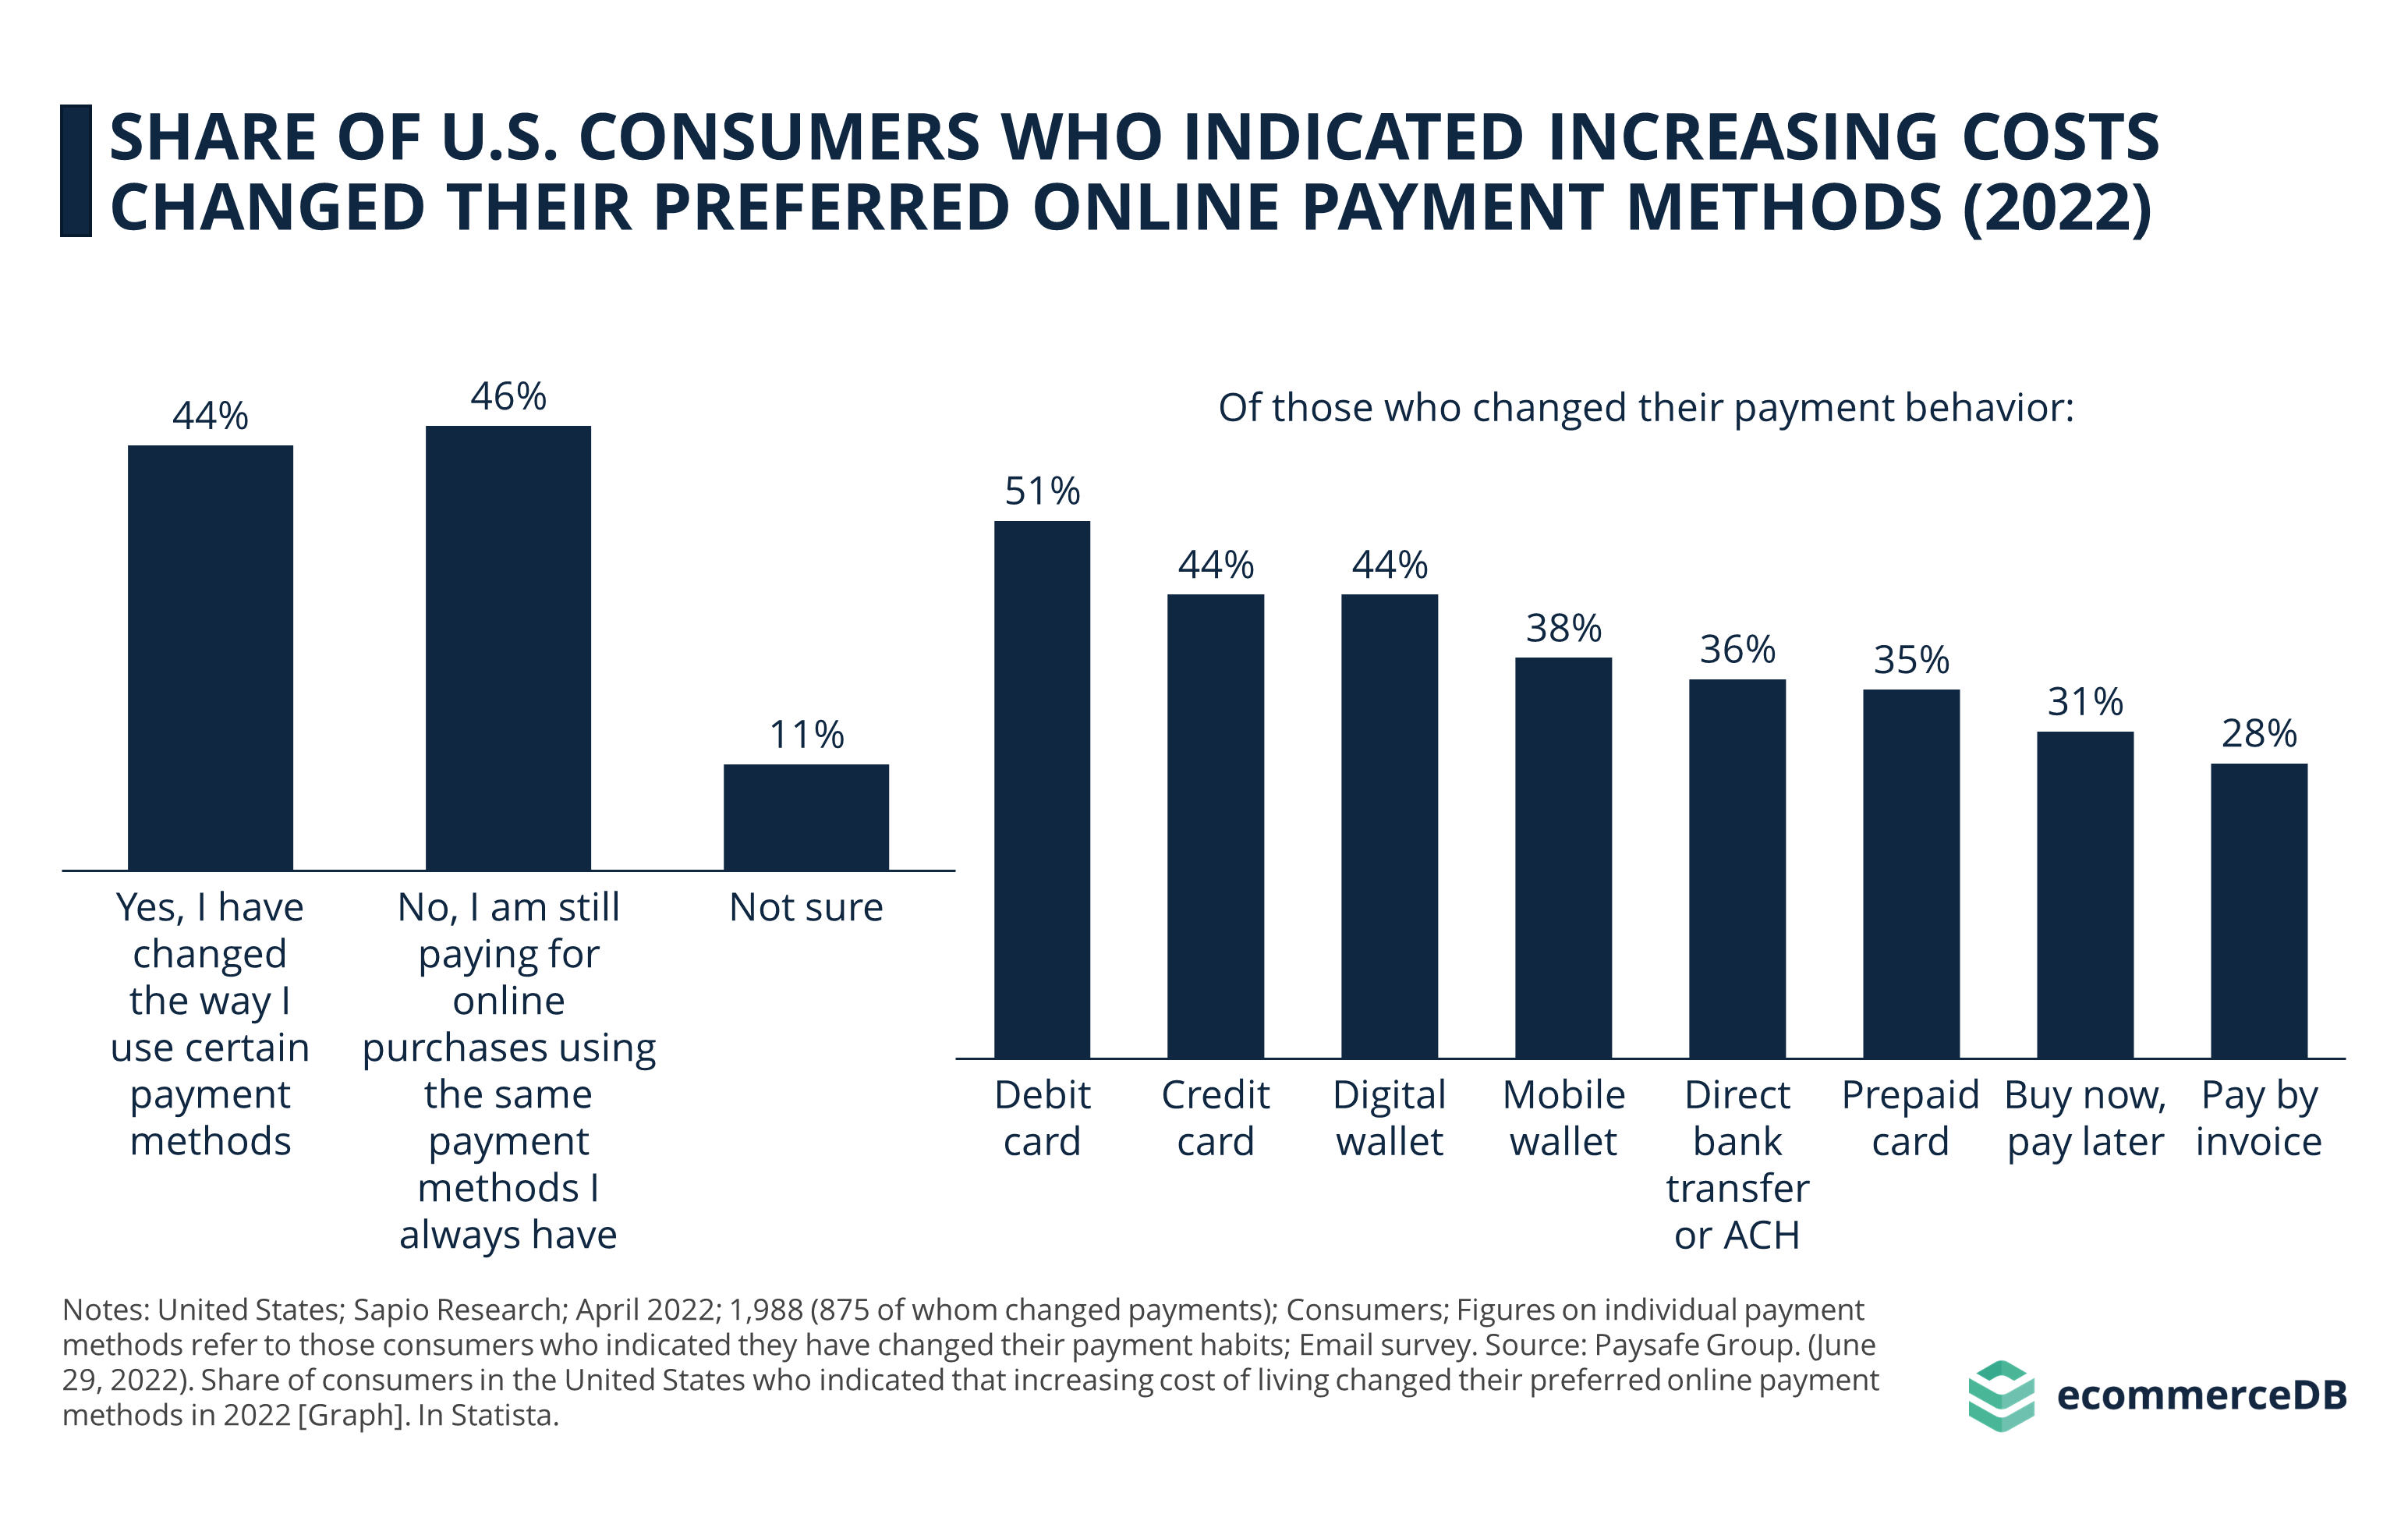 Share of U.S. Consumers Who Indicated Increasing Costs Changed Their Preferred Online Payment Methods (2022)